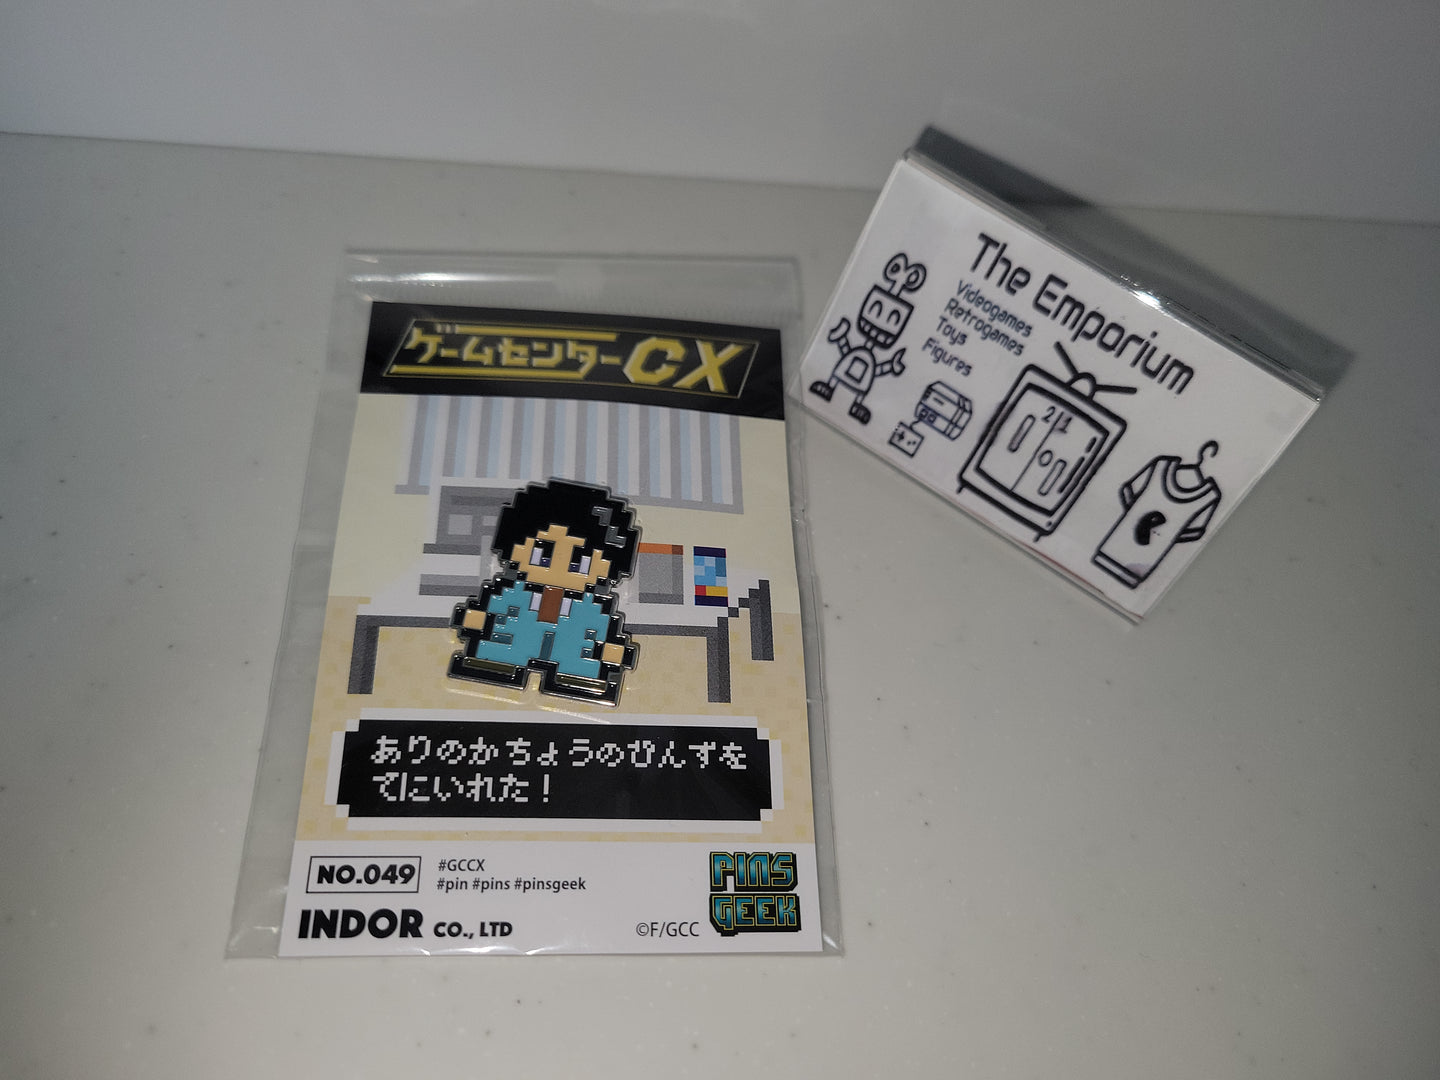 Game Center CX Manager Arino Dot Pins - toy action figure gadgets